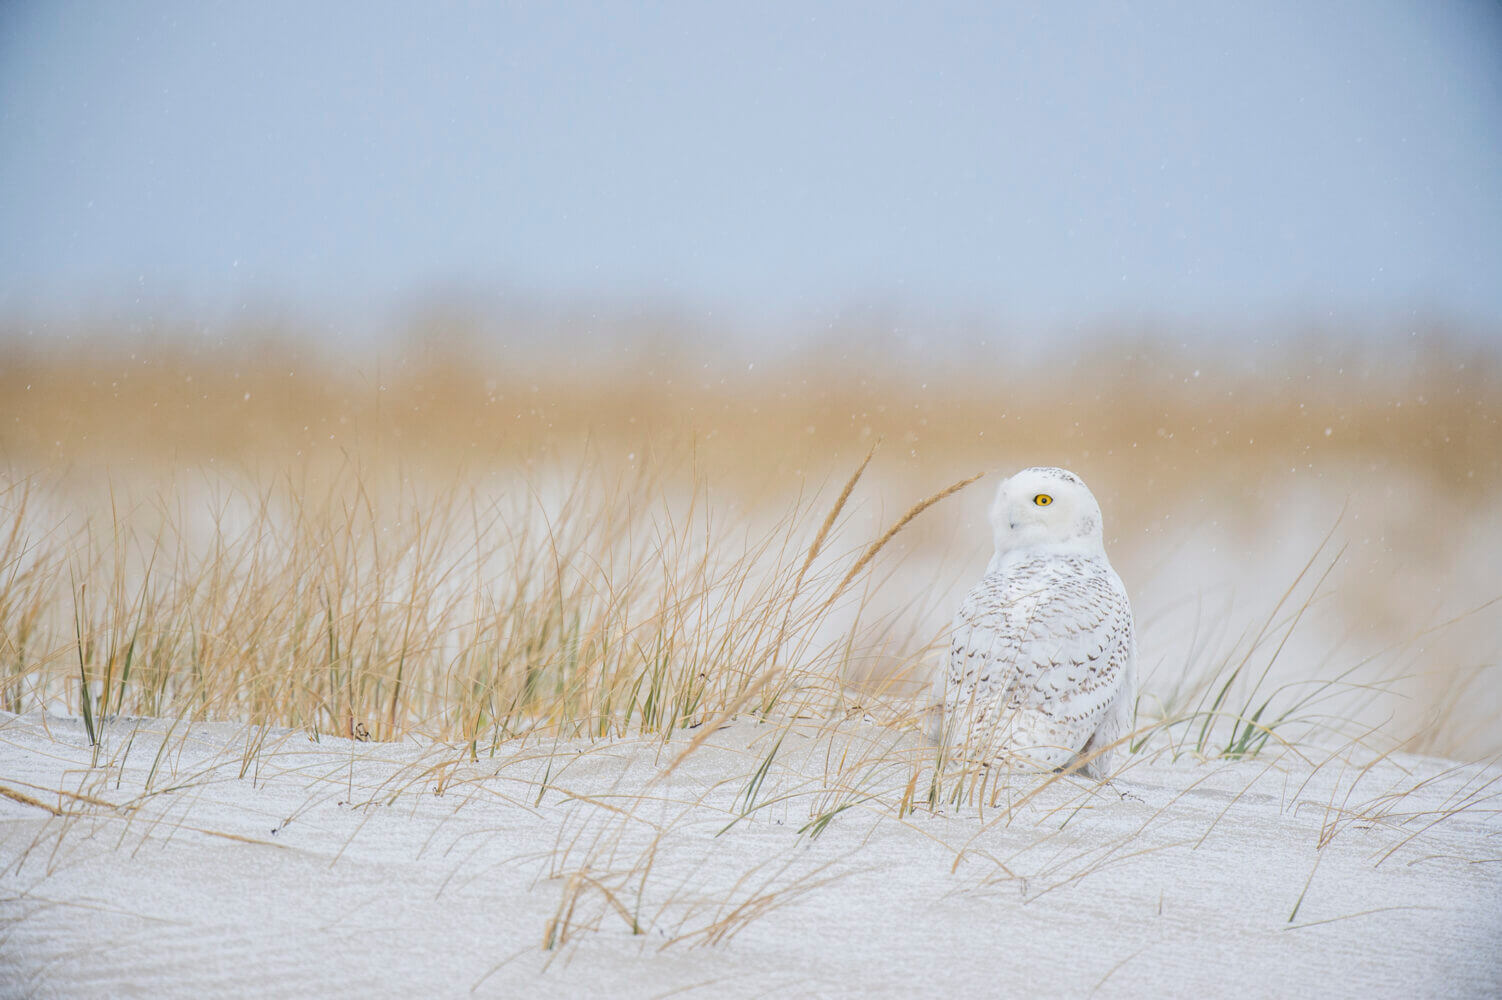 A Snowy Owl sitting on a sand dune with brown grass around it in a light snow on a cold winter day.